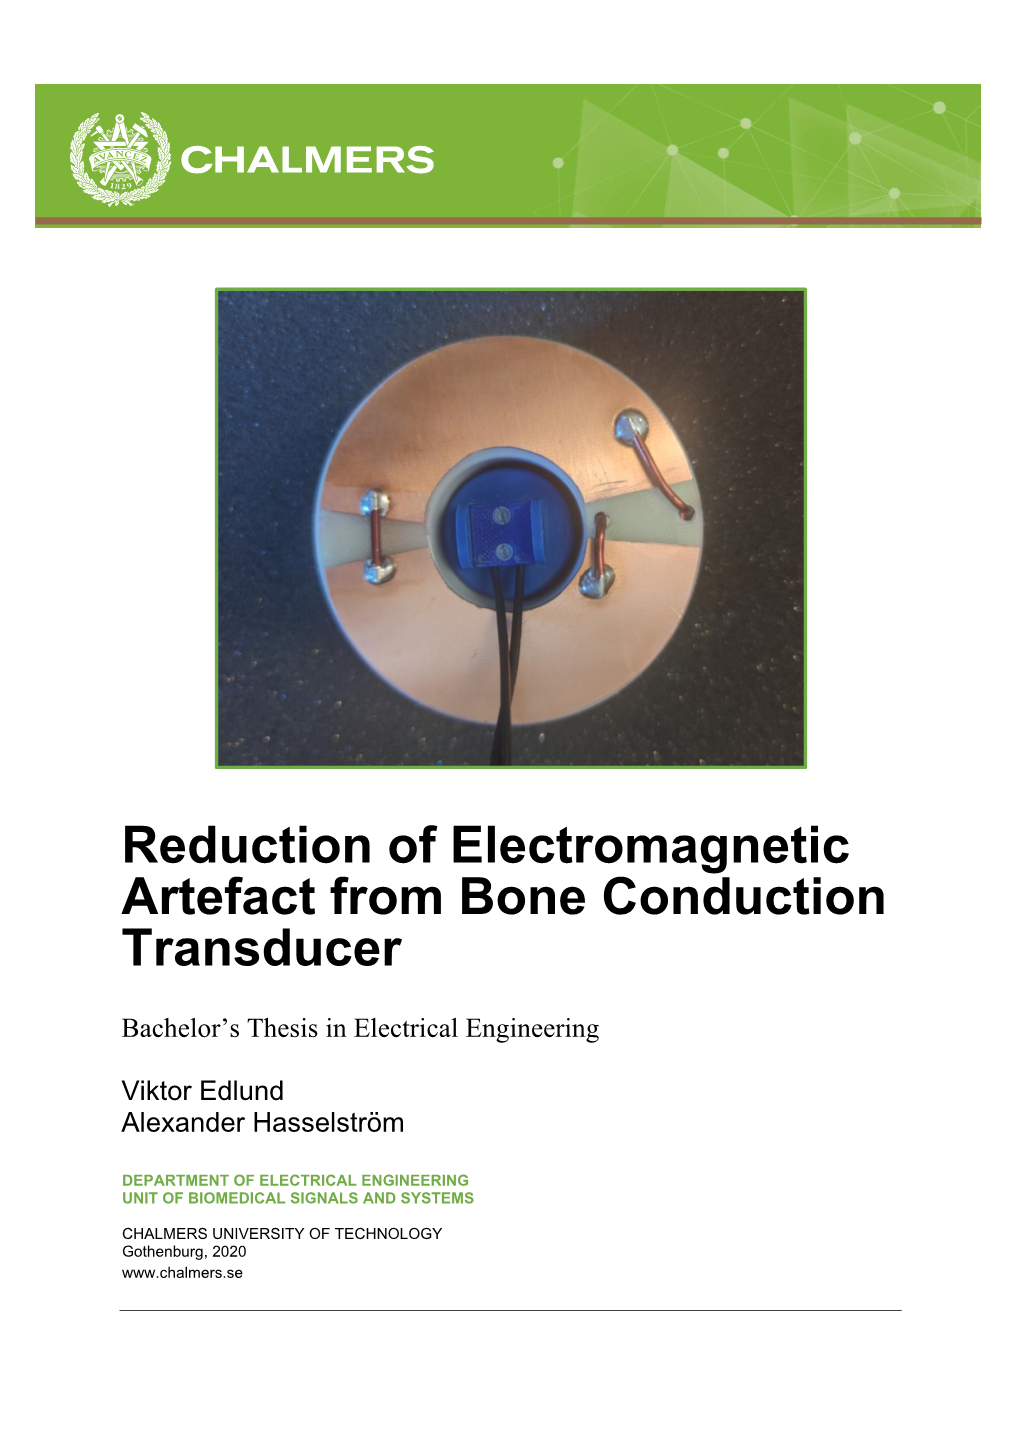 Reduction of Electromagnetic Artefact from Bone Conduction Transducer